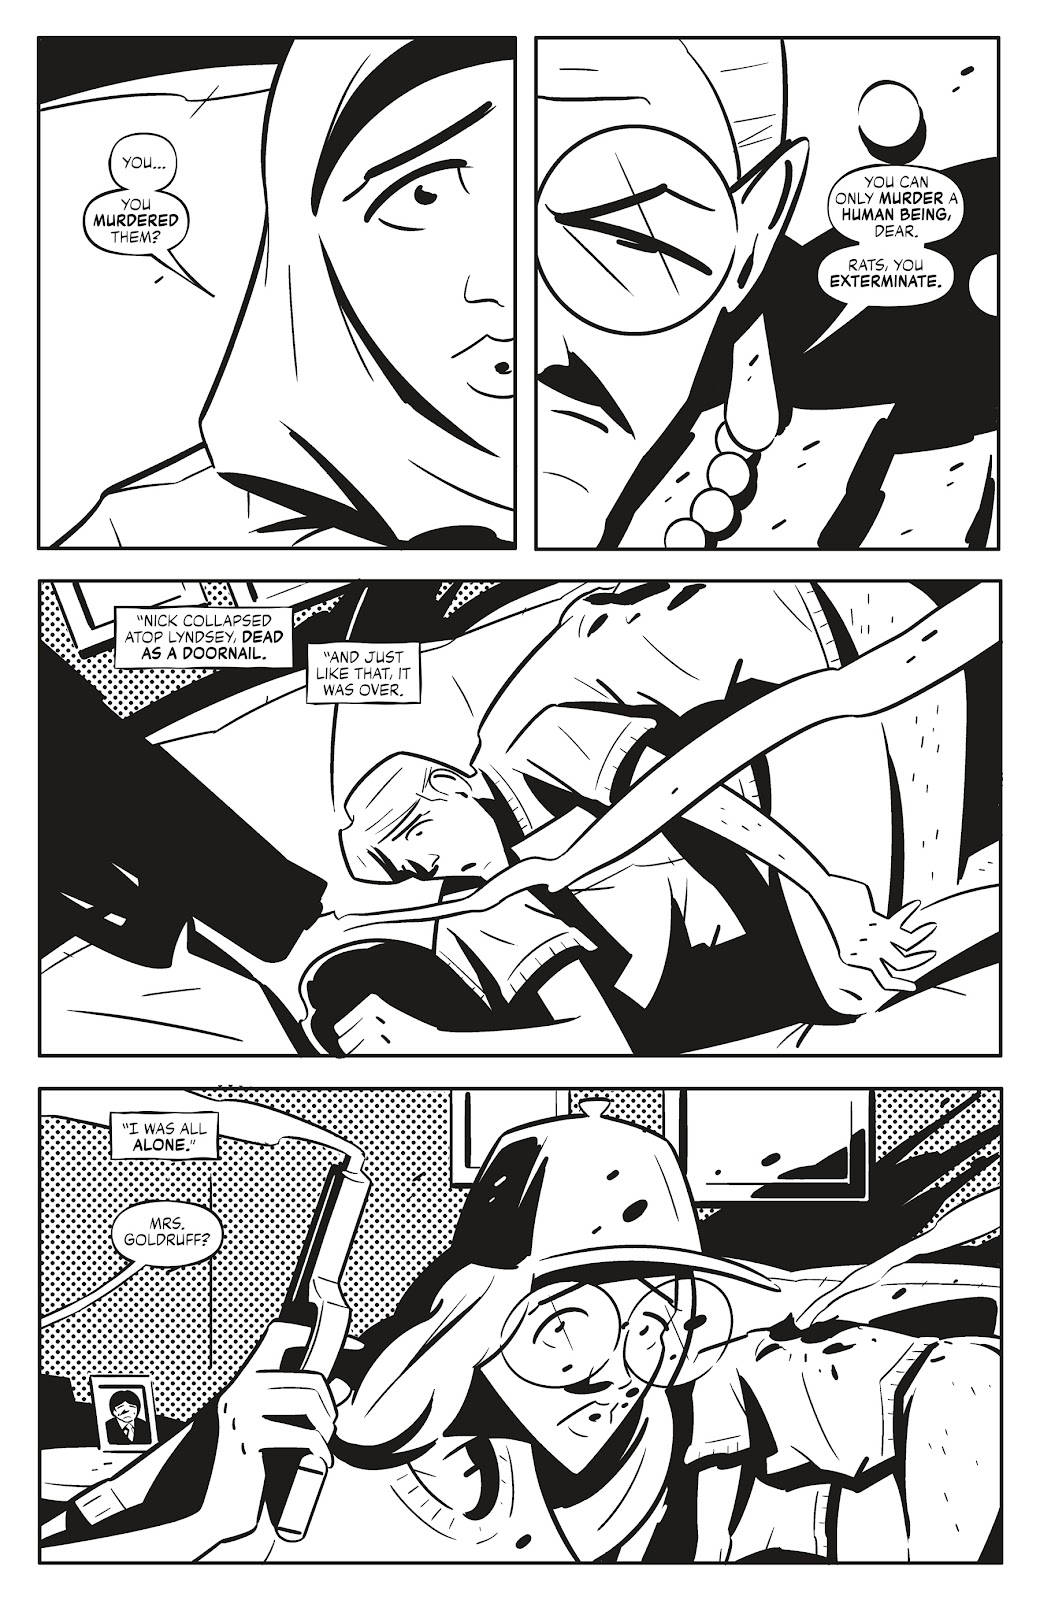 Quick Stops Vol. 2 issue 3 - Page 15